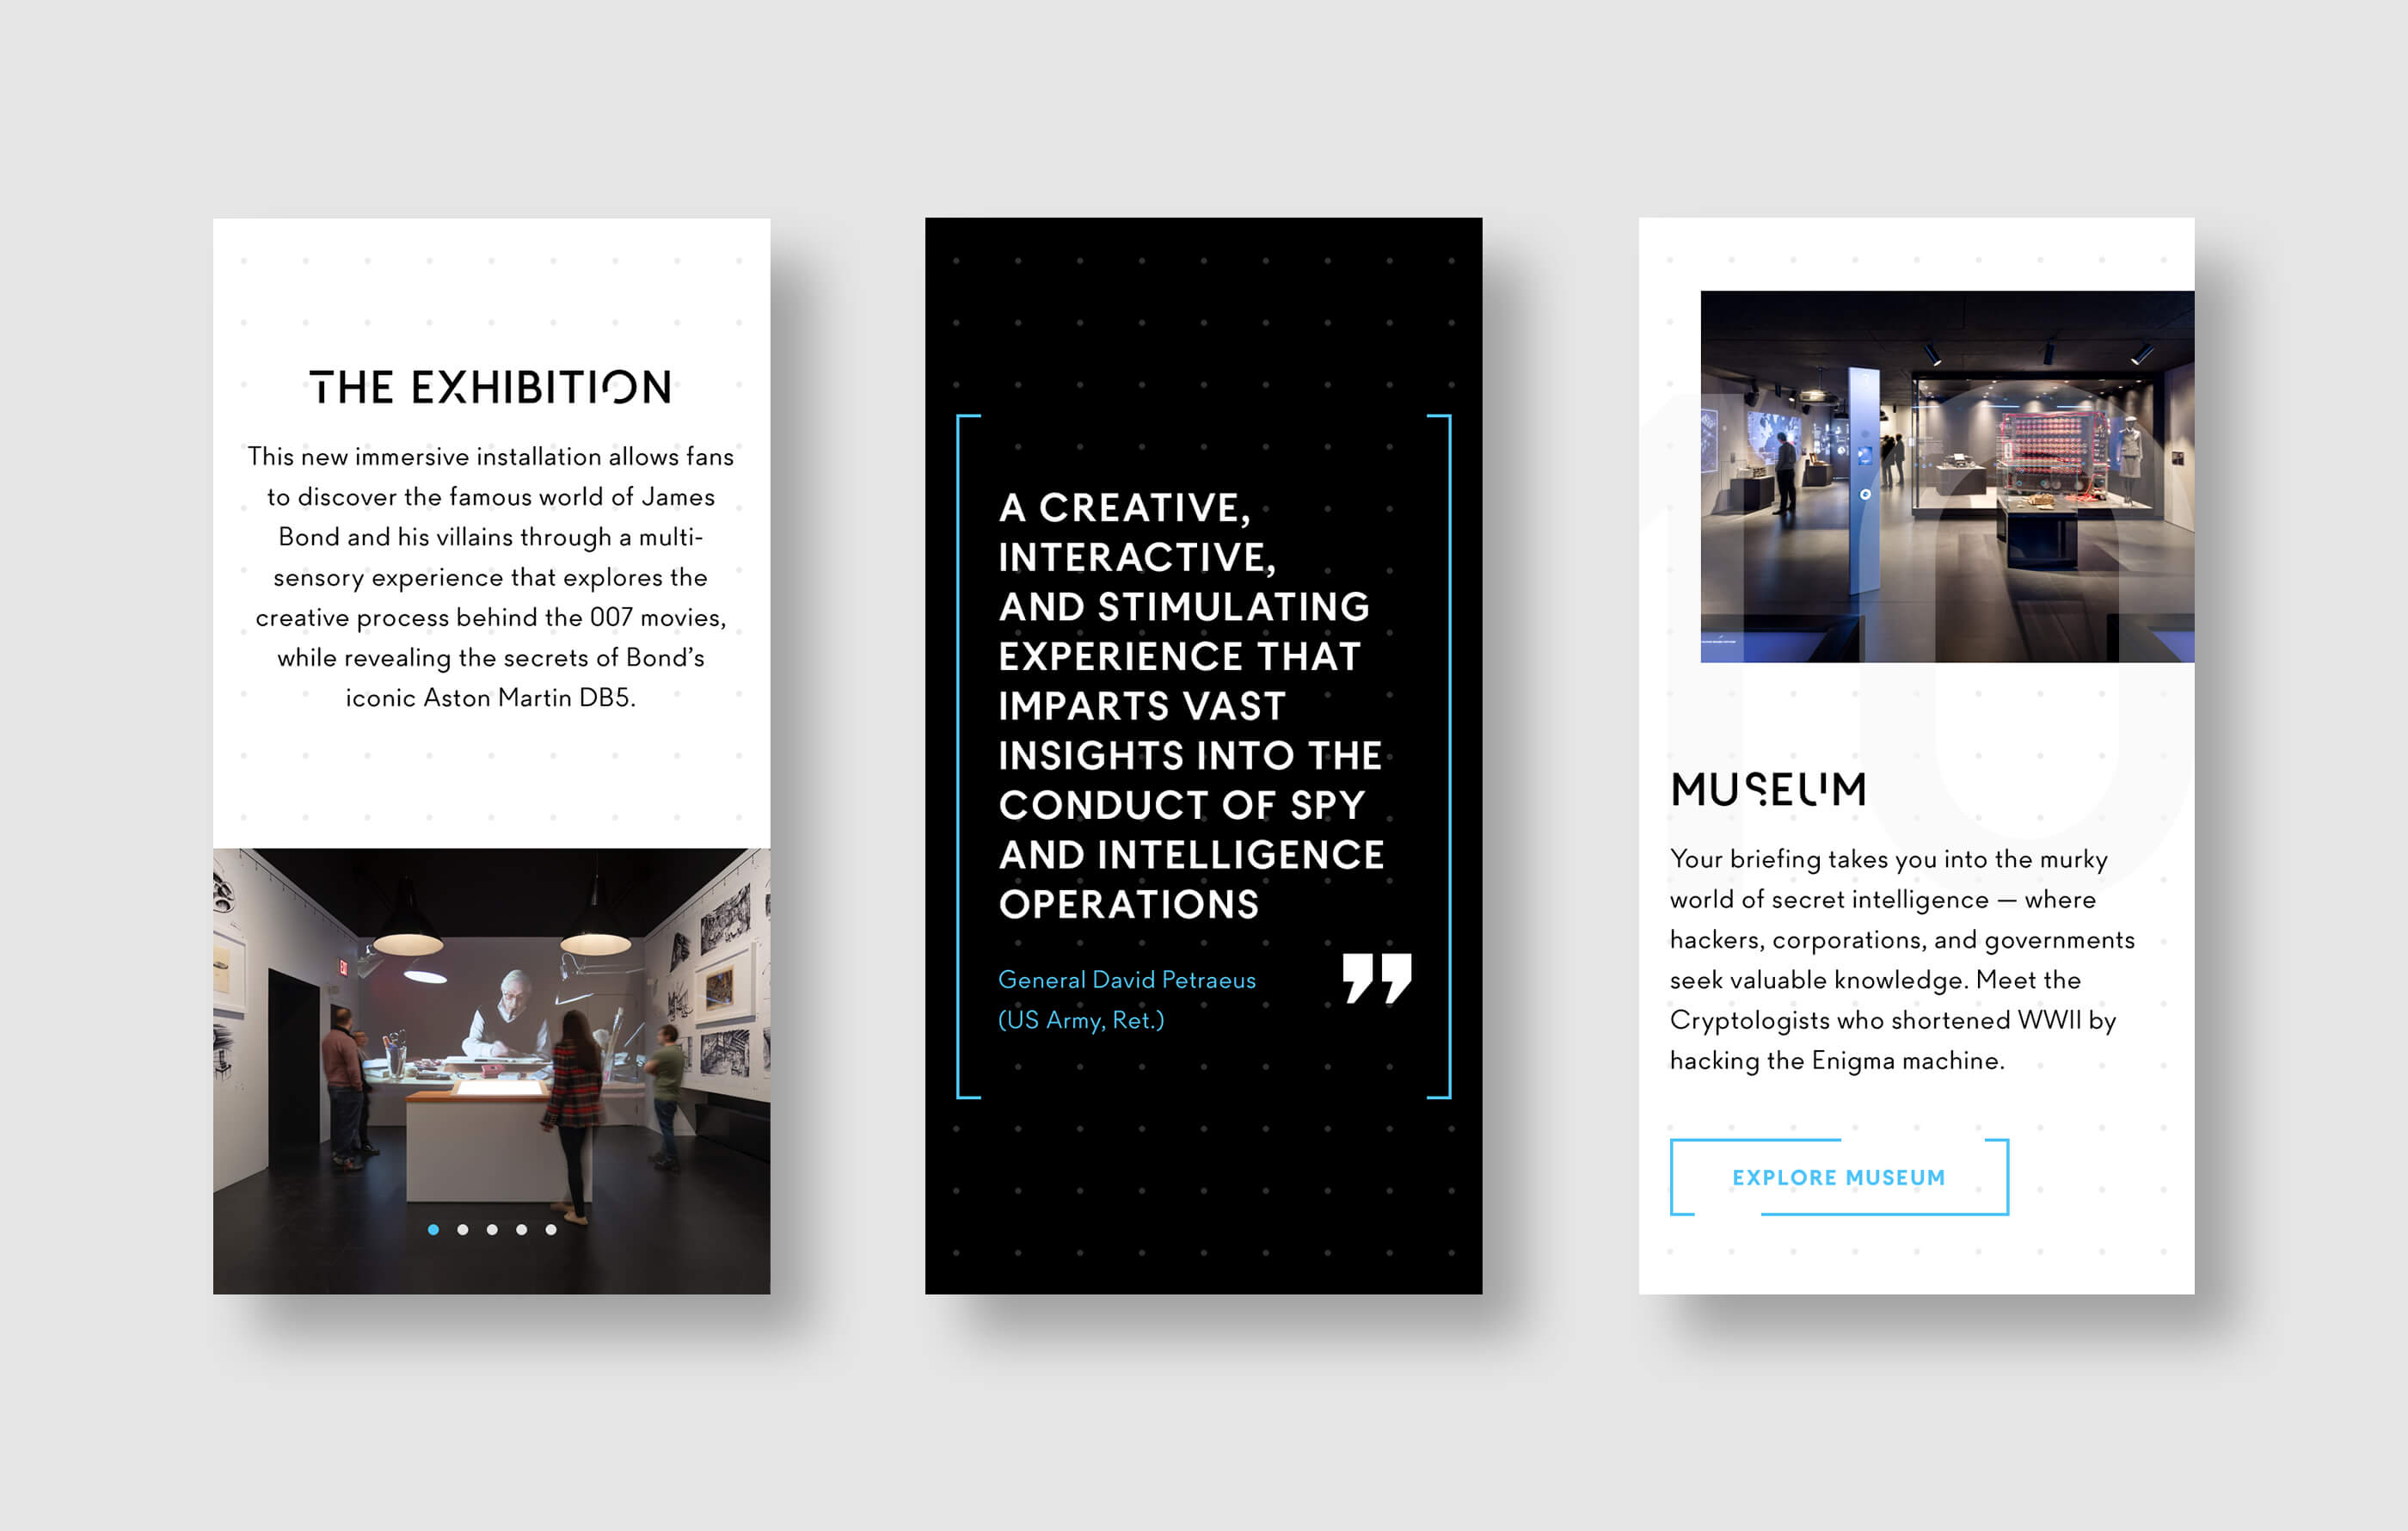 Three mobile phone mockups, featuring an introduction to the 007 James Bond exhibition, client quote and overview of the Spyscape museum